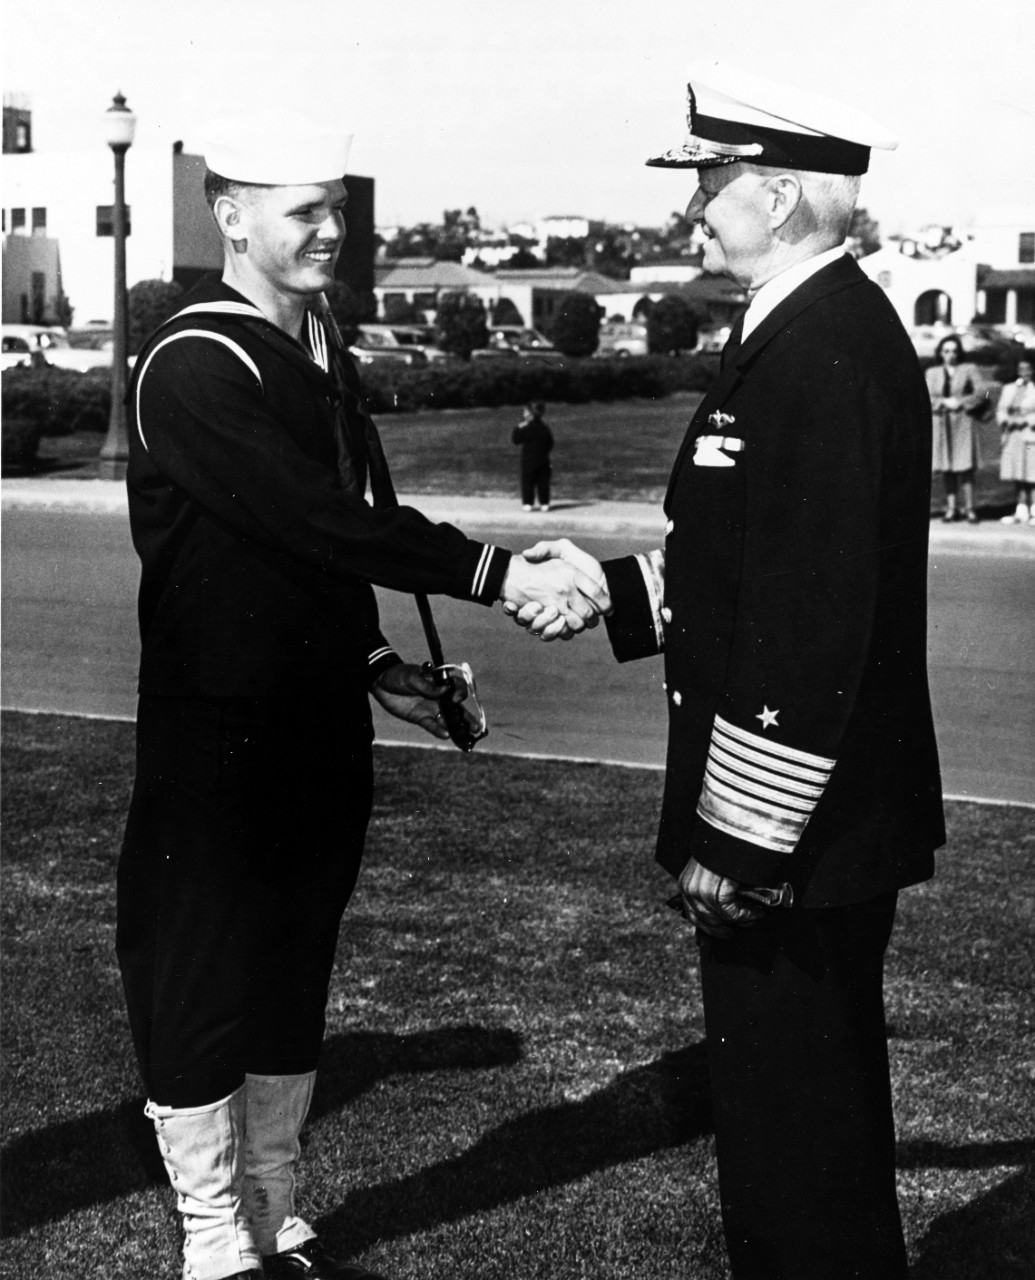 Fleet Admiral Nimitz, Shakes Hands with a Young Navy Recruit